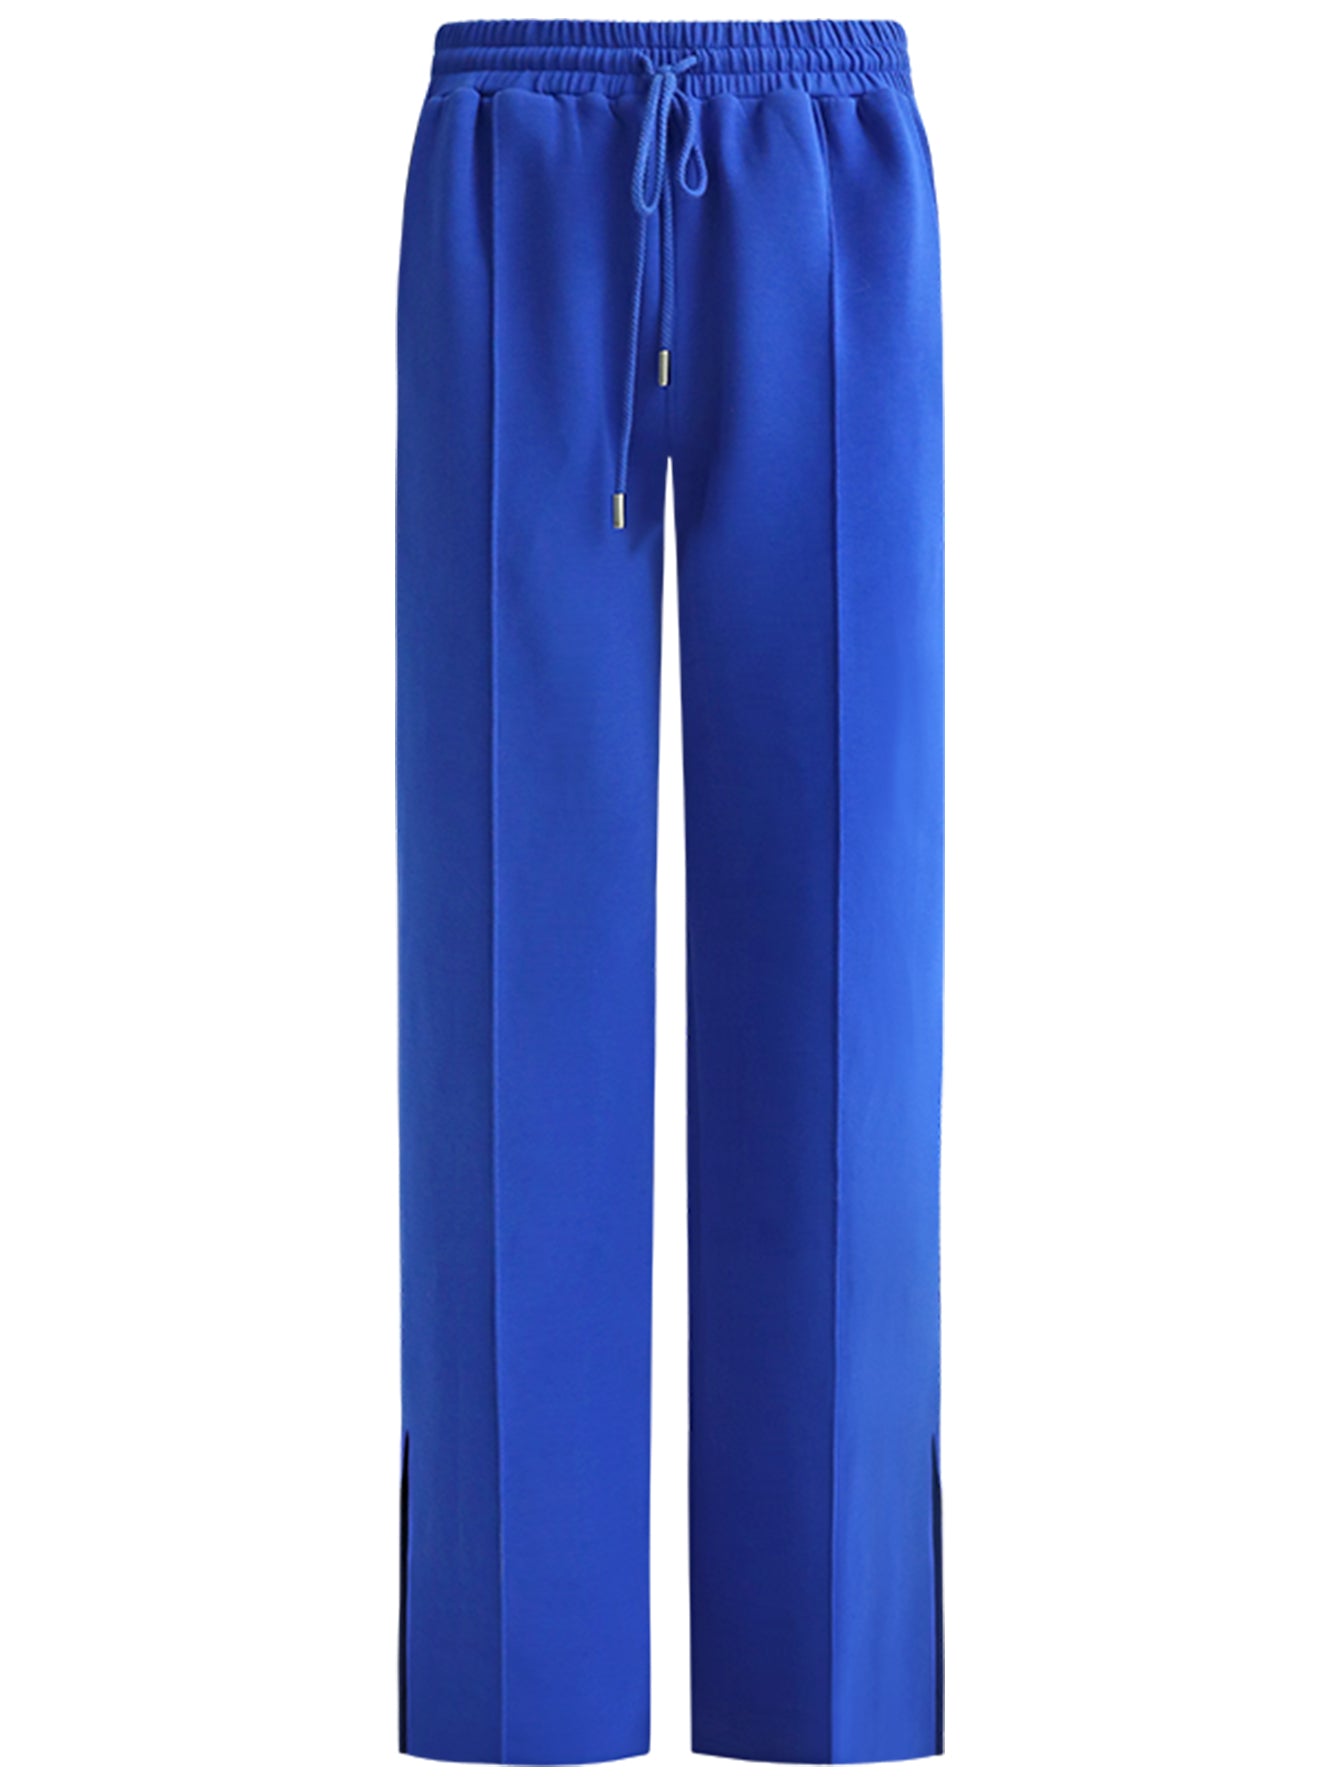 breathable-casual-flared-pants-with-side-slits_all_blue_2.jpg